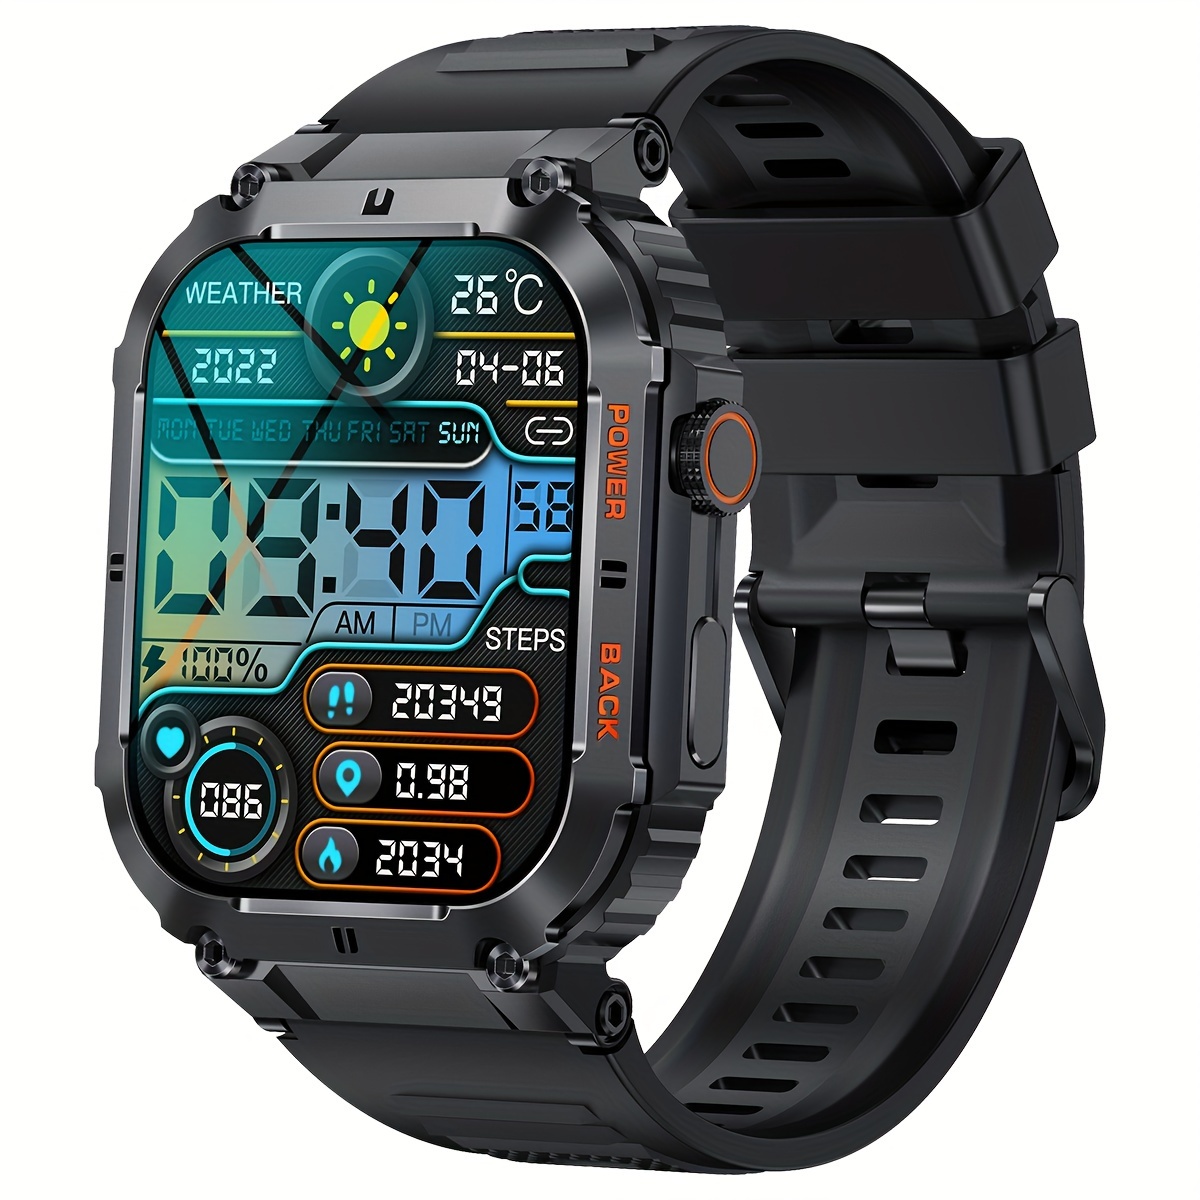 

Bezosmax Smartwatch, Rugged & Durable, Large Screen, Full Touch, Tracking, Multiple Sports Modes, Sleep Monitoring, Wearable Wristwatch With Call Support.